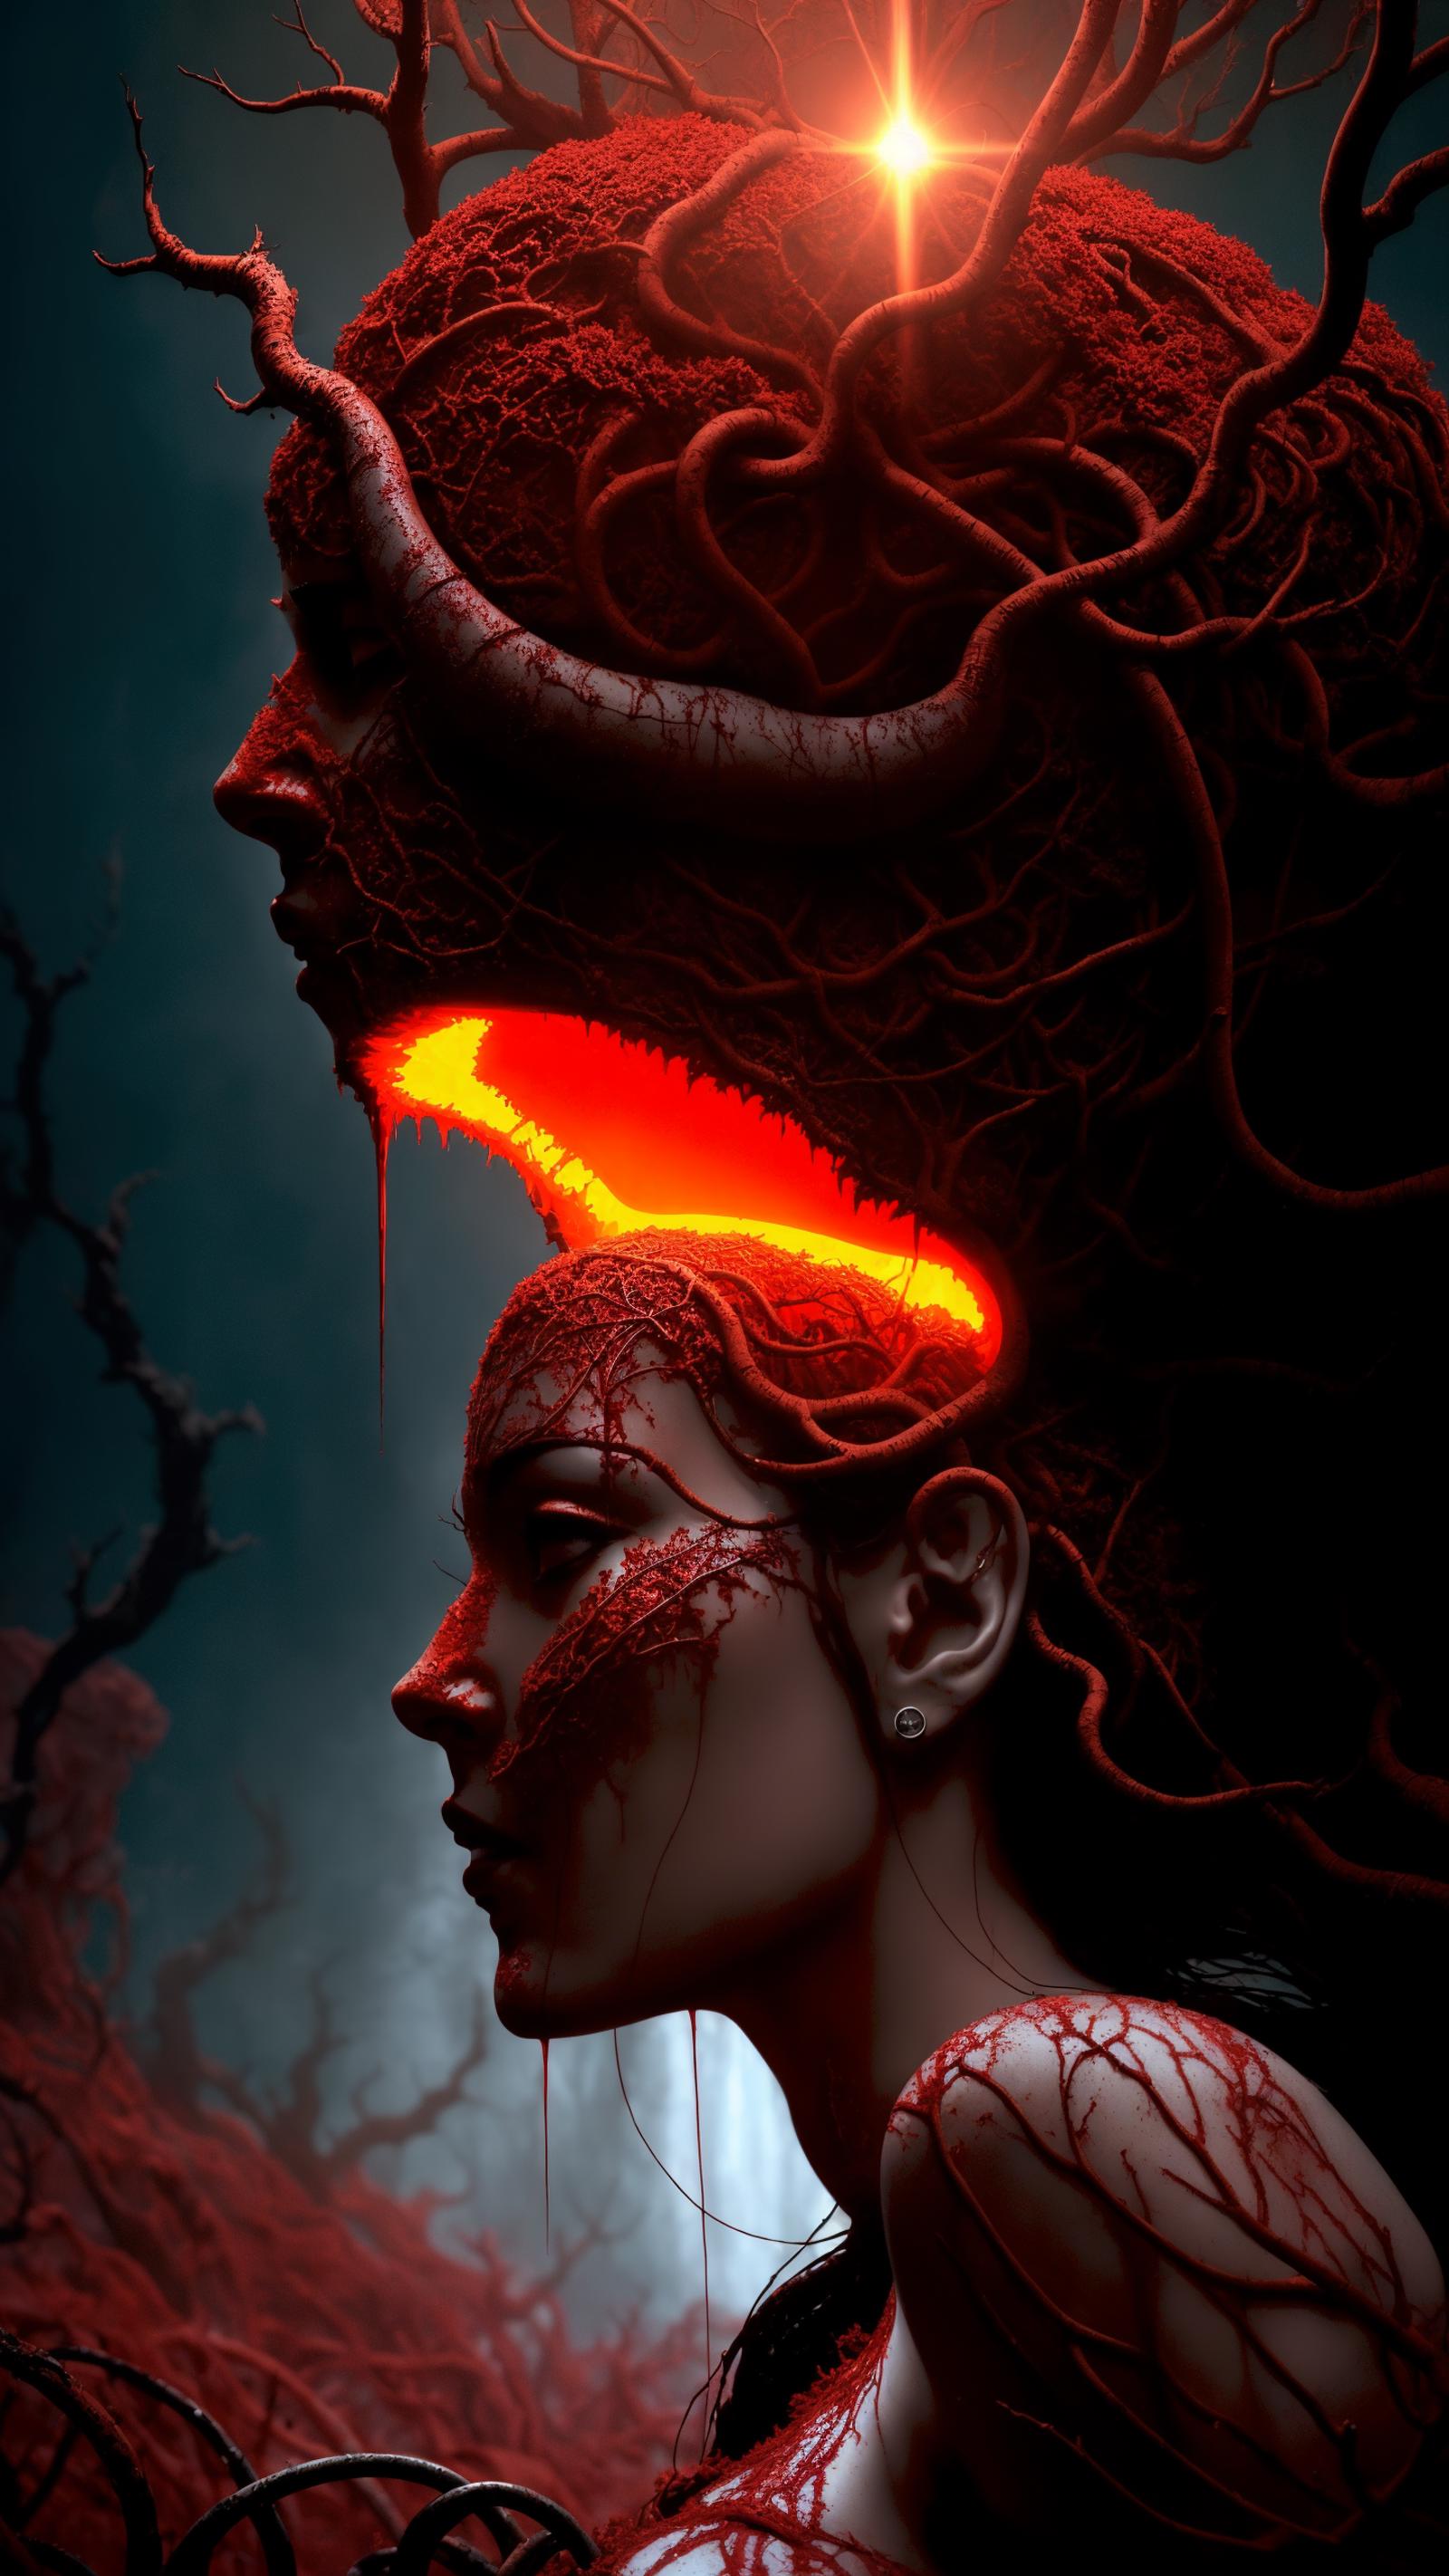 A dark and mysterious image of a woman with blood dripping from her face, surrounded by a forest of blood vessels and a giant red horn.